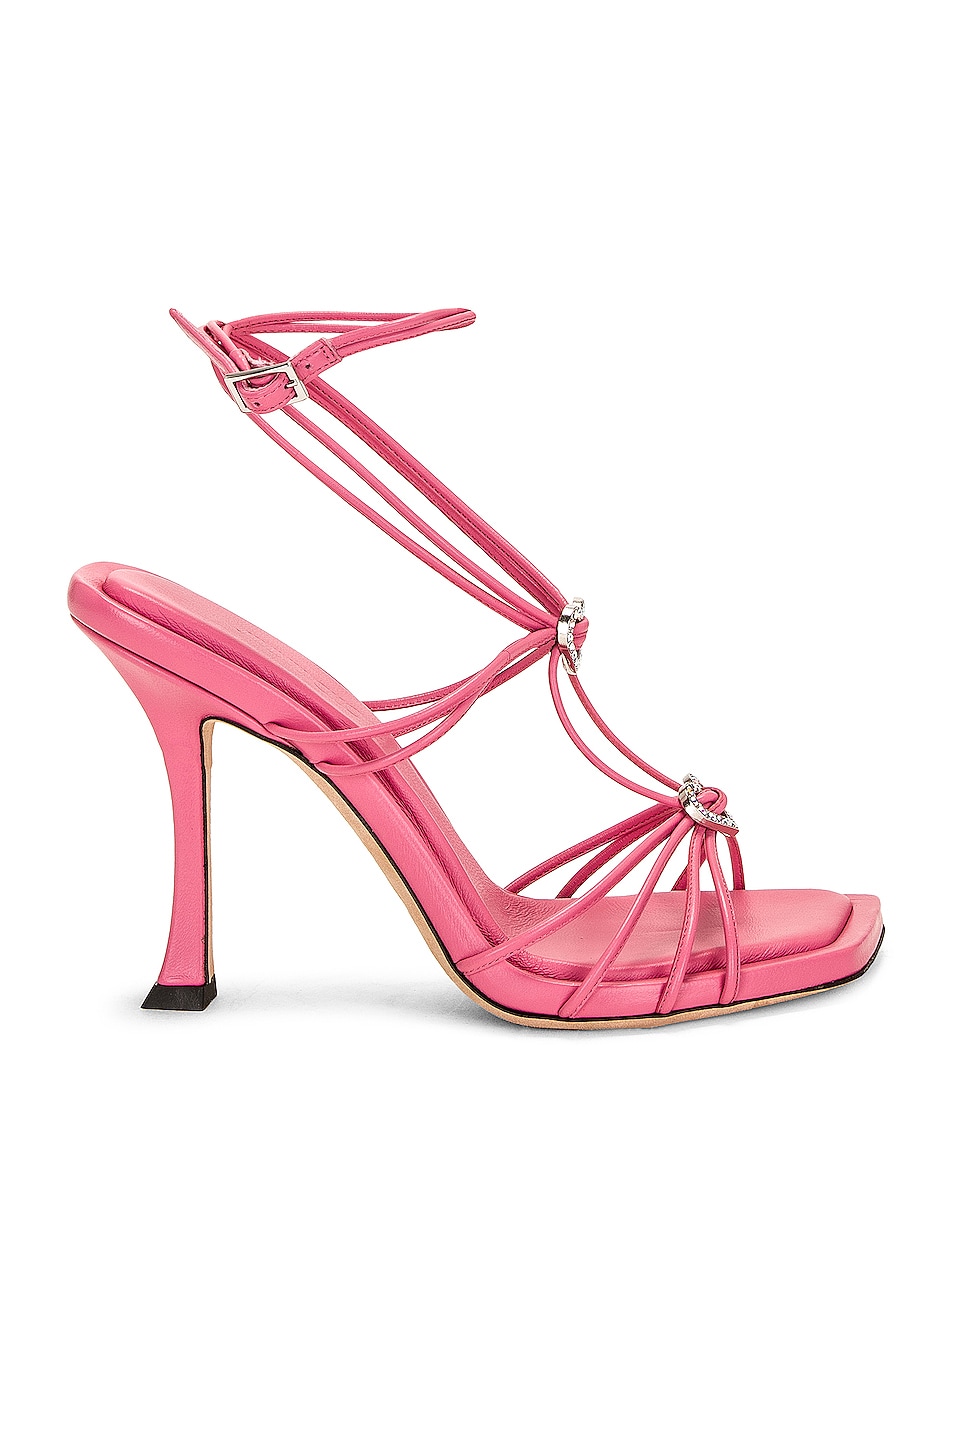 Image 1 of Jimmy Choo Indiya 100 Leather Sandal in Candy Pink